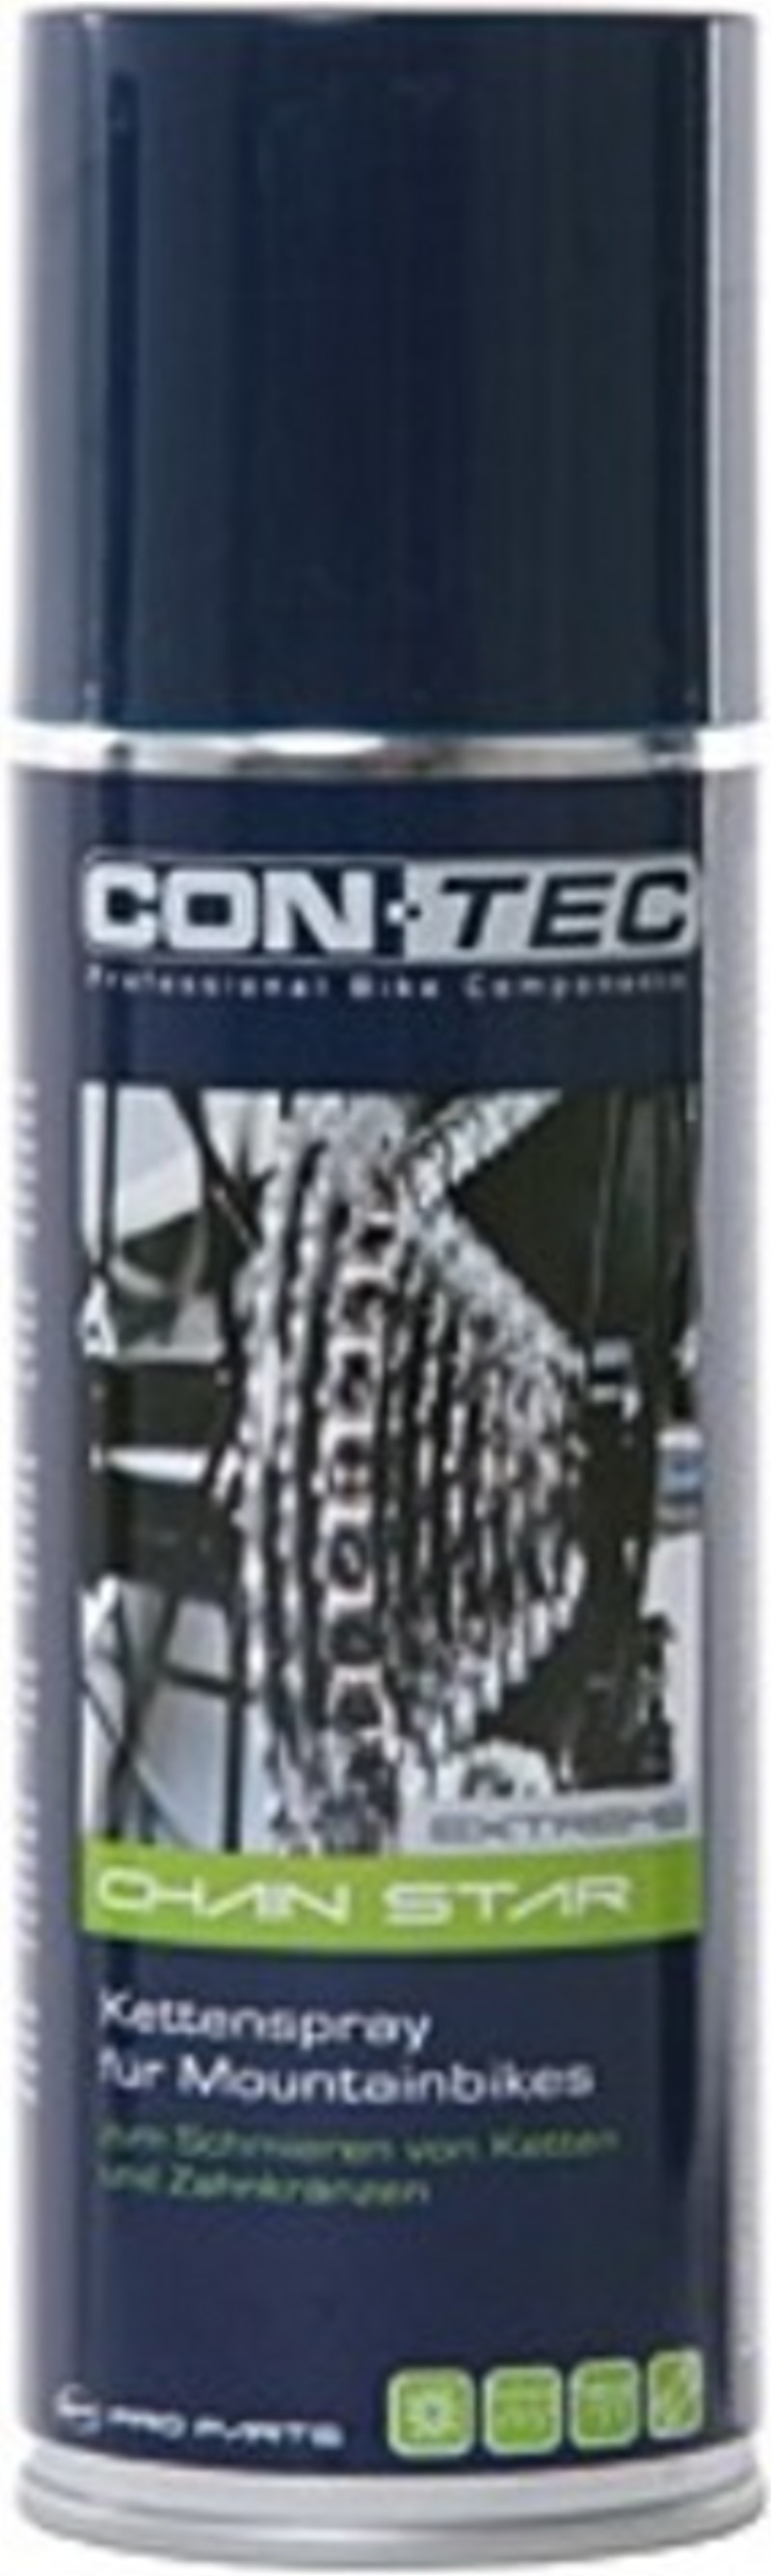 Contec Chain Star Extreme 200ml